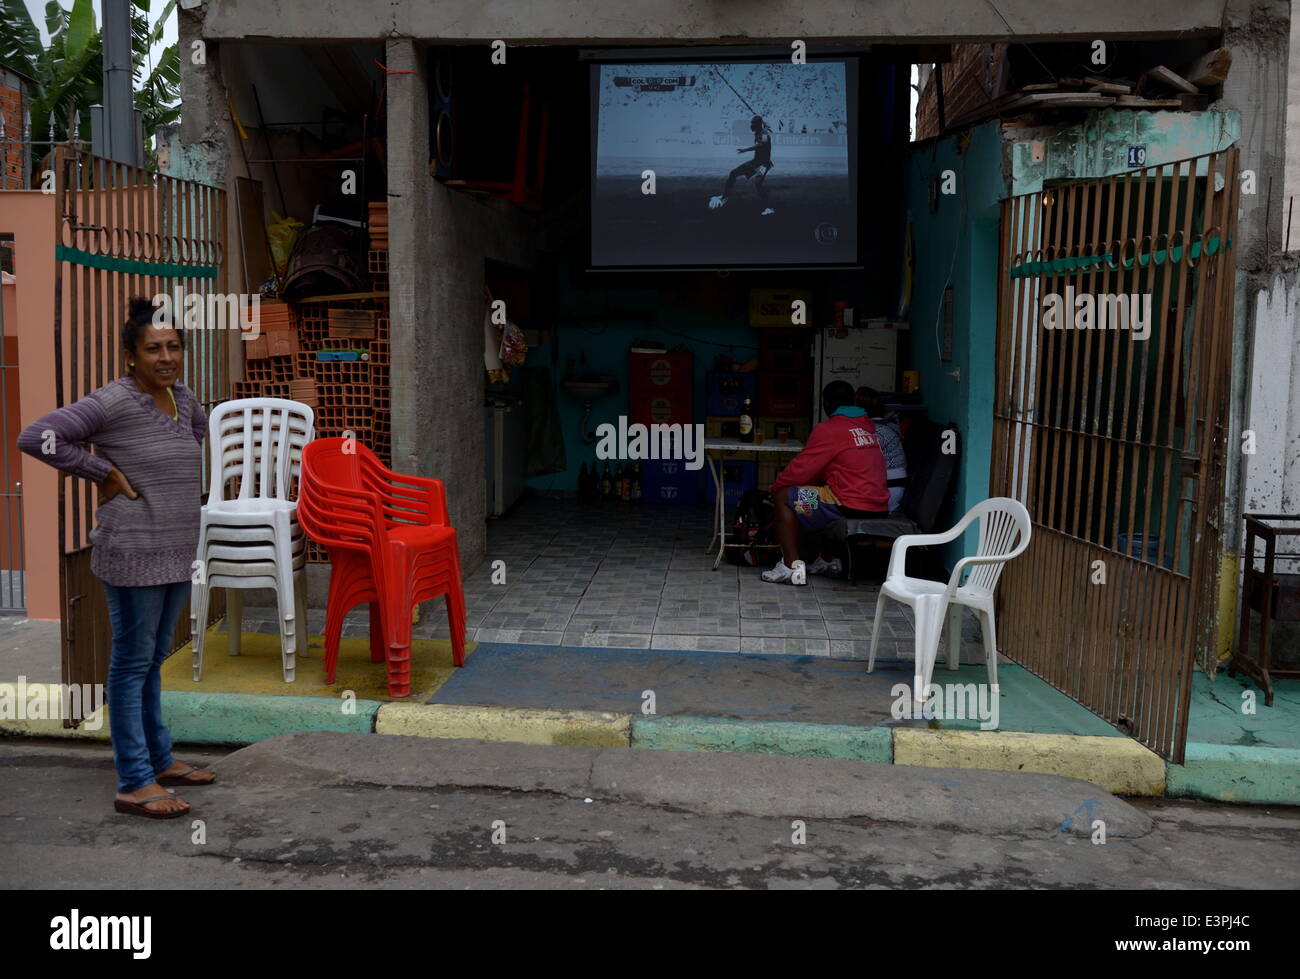 Sao Paulo, Brazil. 19th June, 2014. Brazilians are watching a worldcup game over a screen in the garage of a house at Itaquera, a suburb of Sao Paulo on June 19, 2014.More than a million Brazilians took to the streets a year ago to protest government spending on the tournament. The country's economy has slowed to a crawl and public education and health care lag behind those of industrialized nations. Polls show that most Brazilians think hosting the World Cup was a bad idea. © Gili Yaari/NurPhoto/ZUMAPRESS.com/Alamy Live News Stock Photo